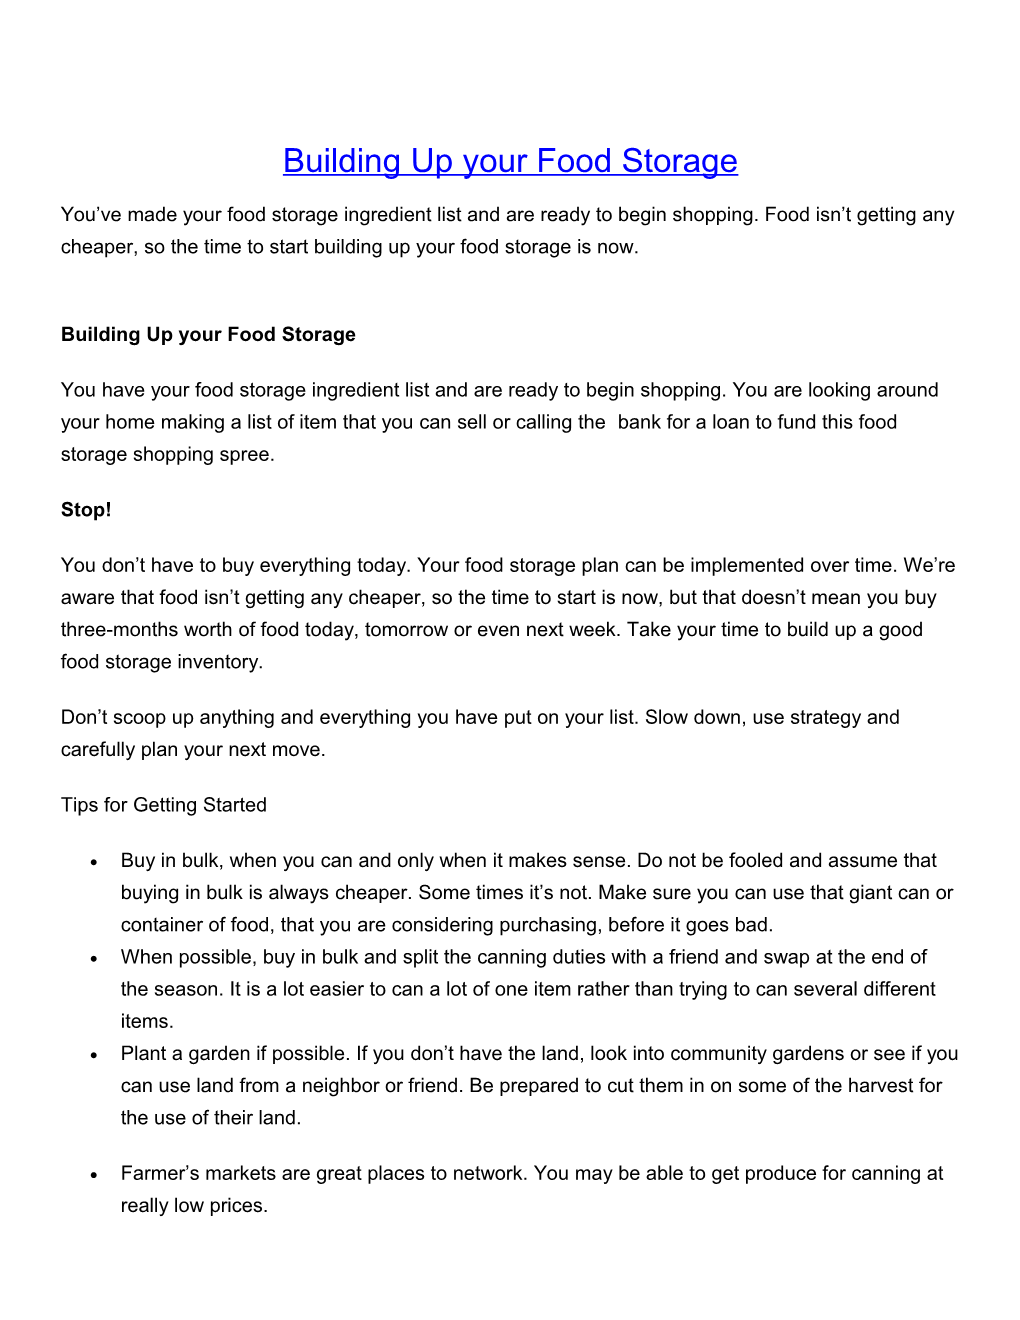 Building up Your Food Storage